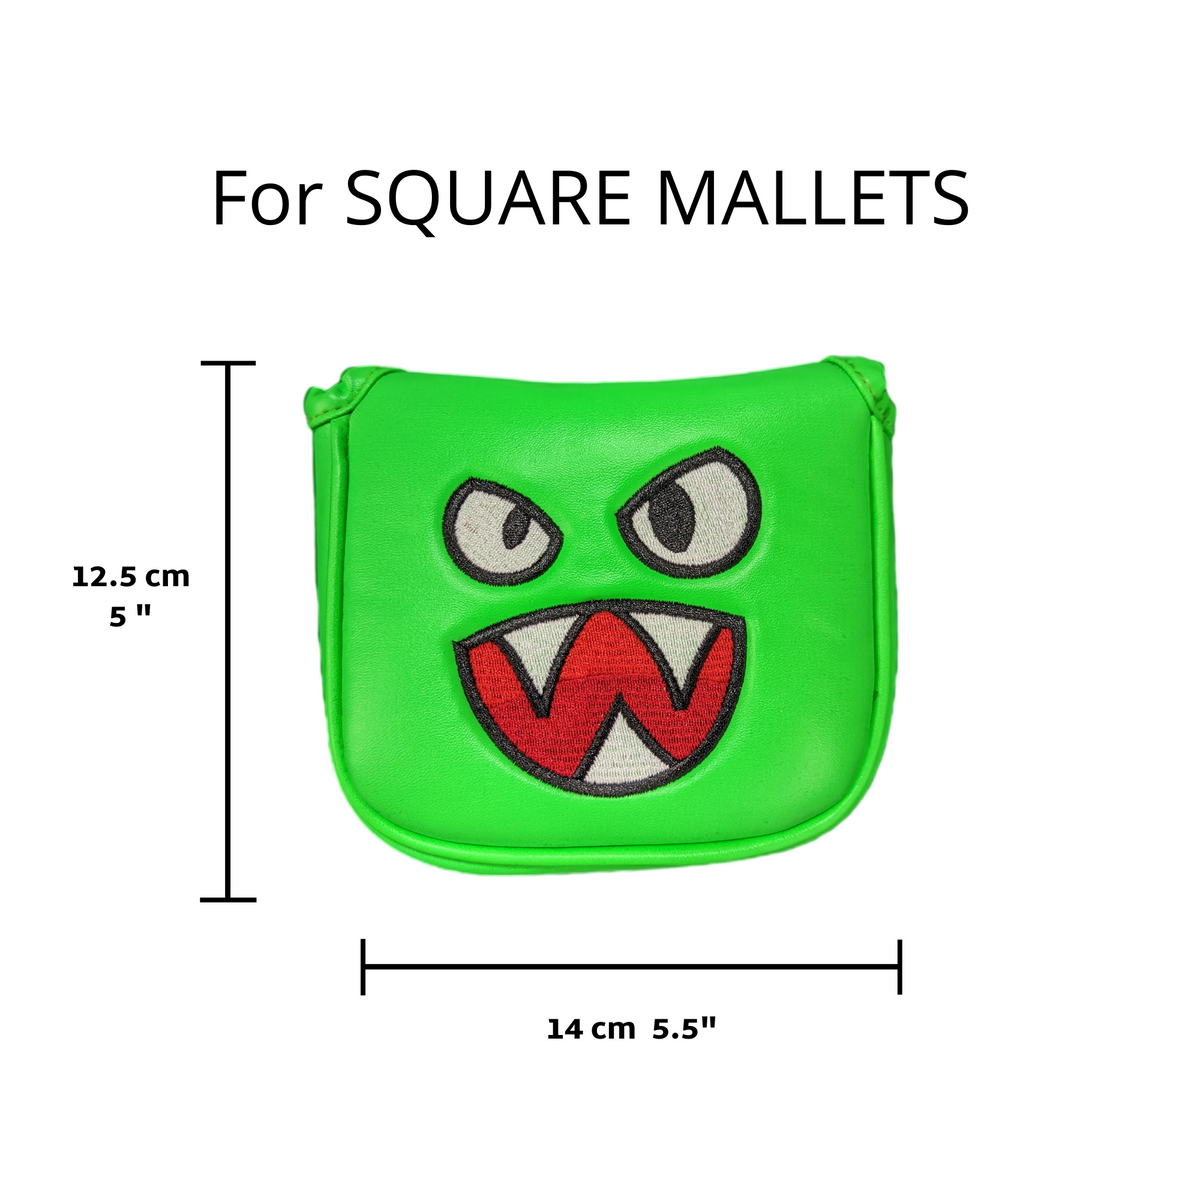 Green Monster - Square MALLET Putter Headcover